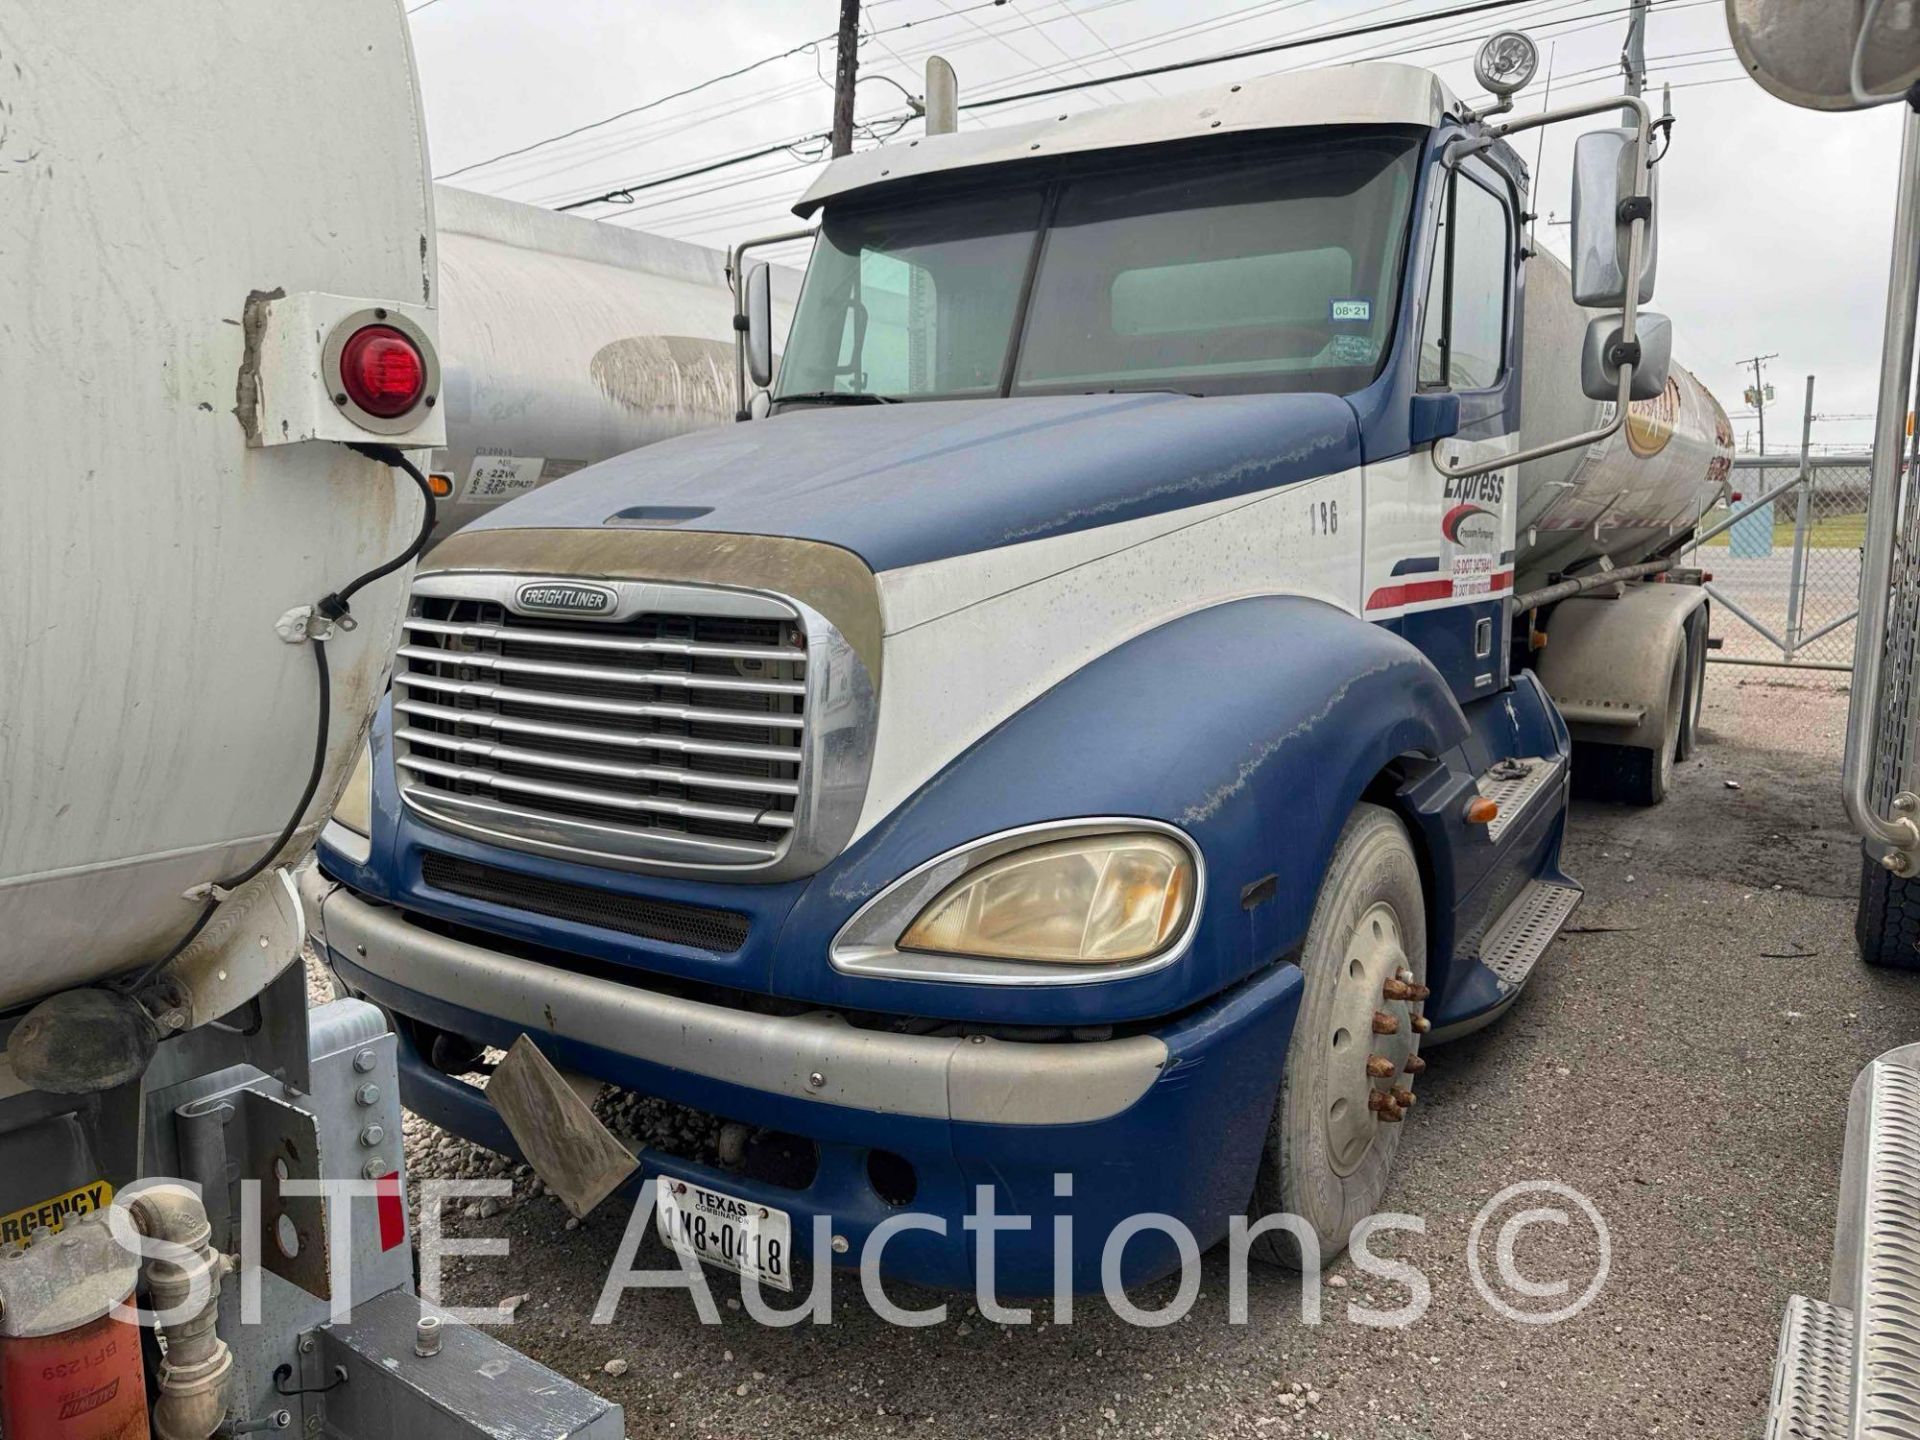 2004 Freightliner Columbia T/A Fuel Truck - Image 3 of 85